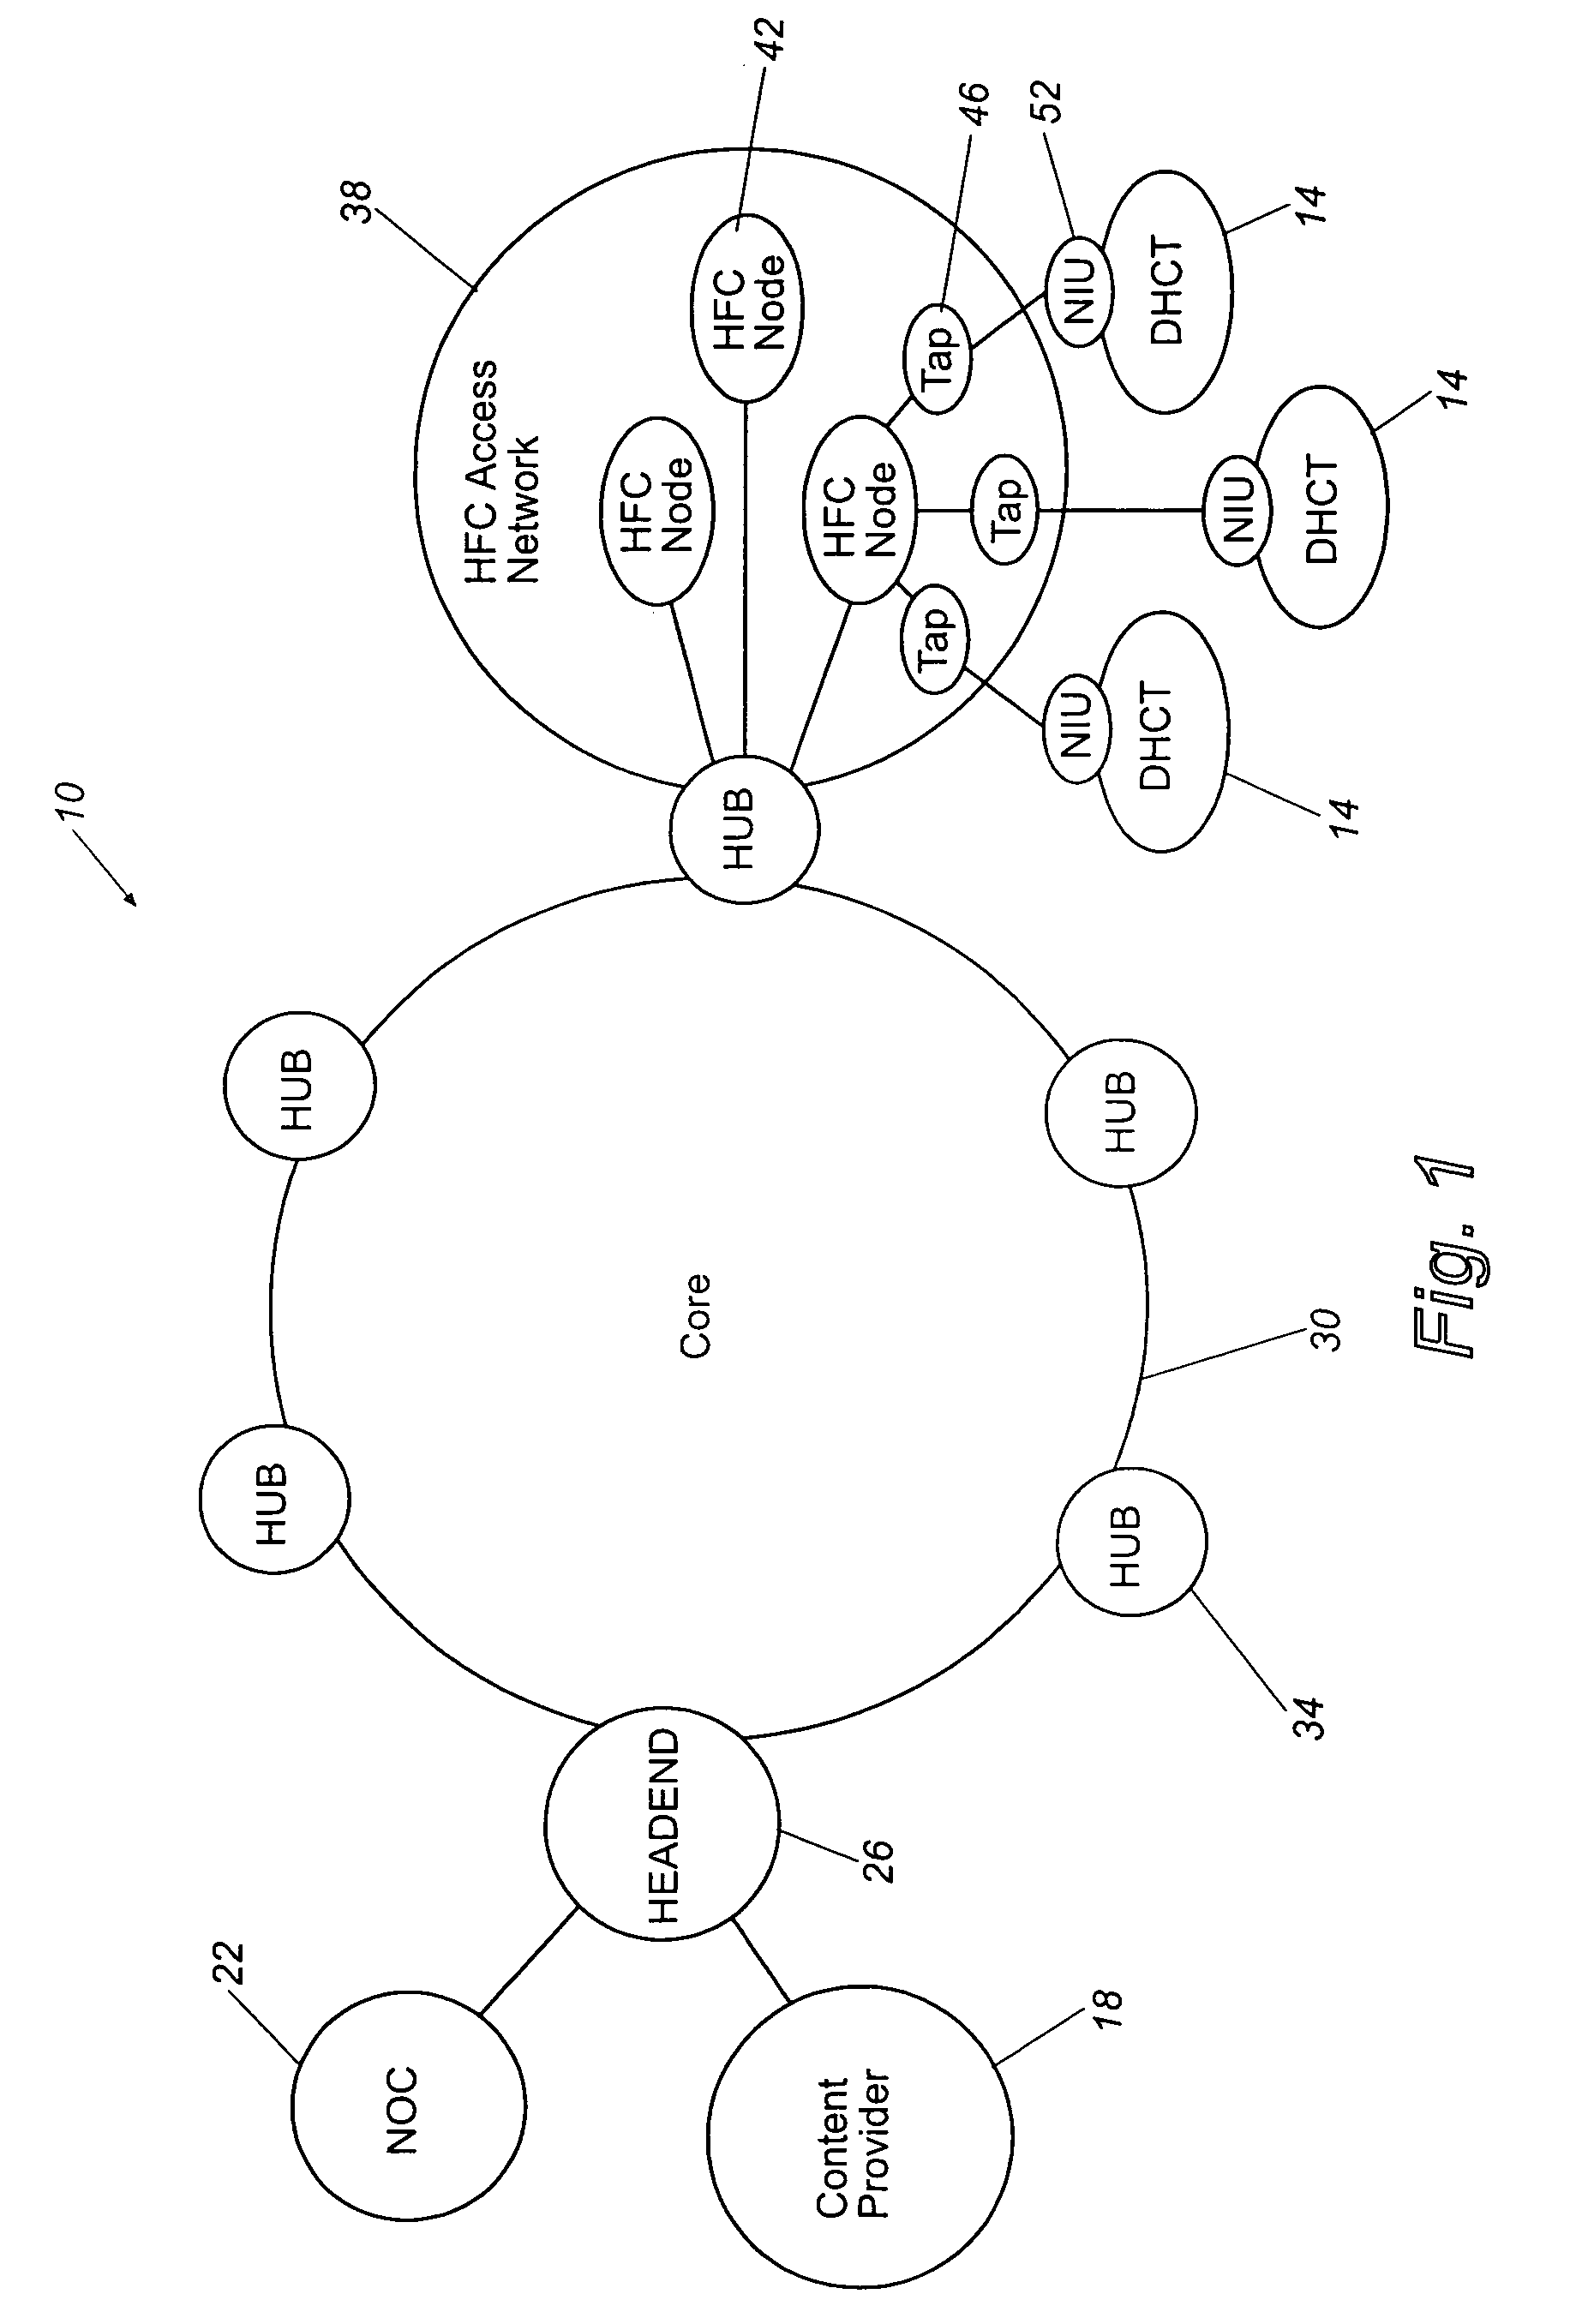 Apparatuses and methods to enable the simultaneous viewing of multiple television channels and electronic program guide content